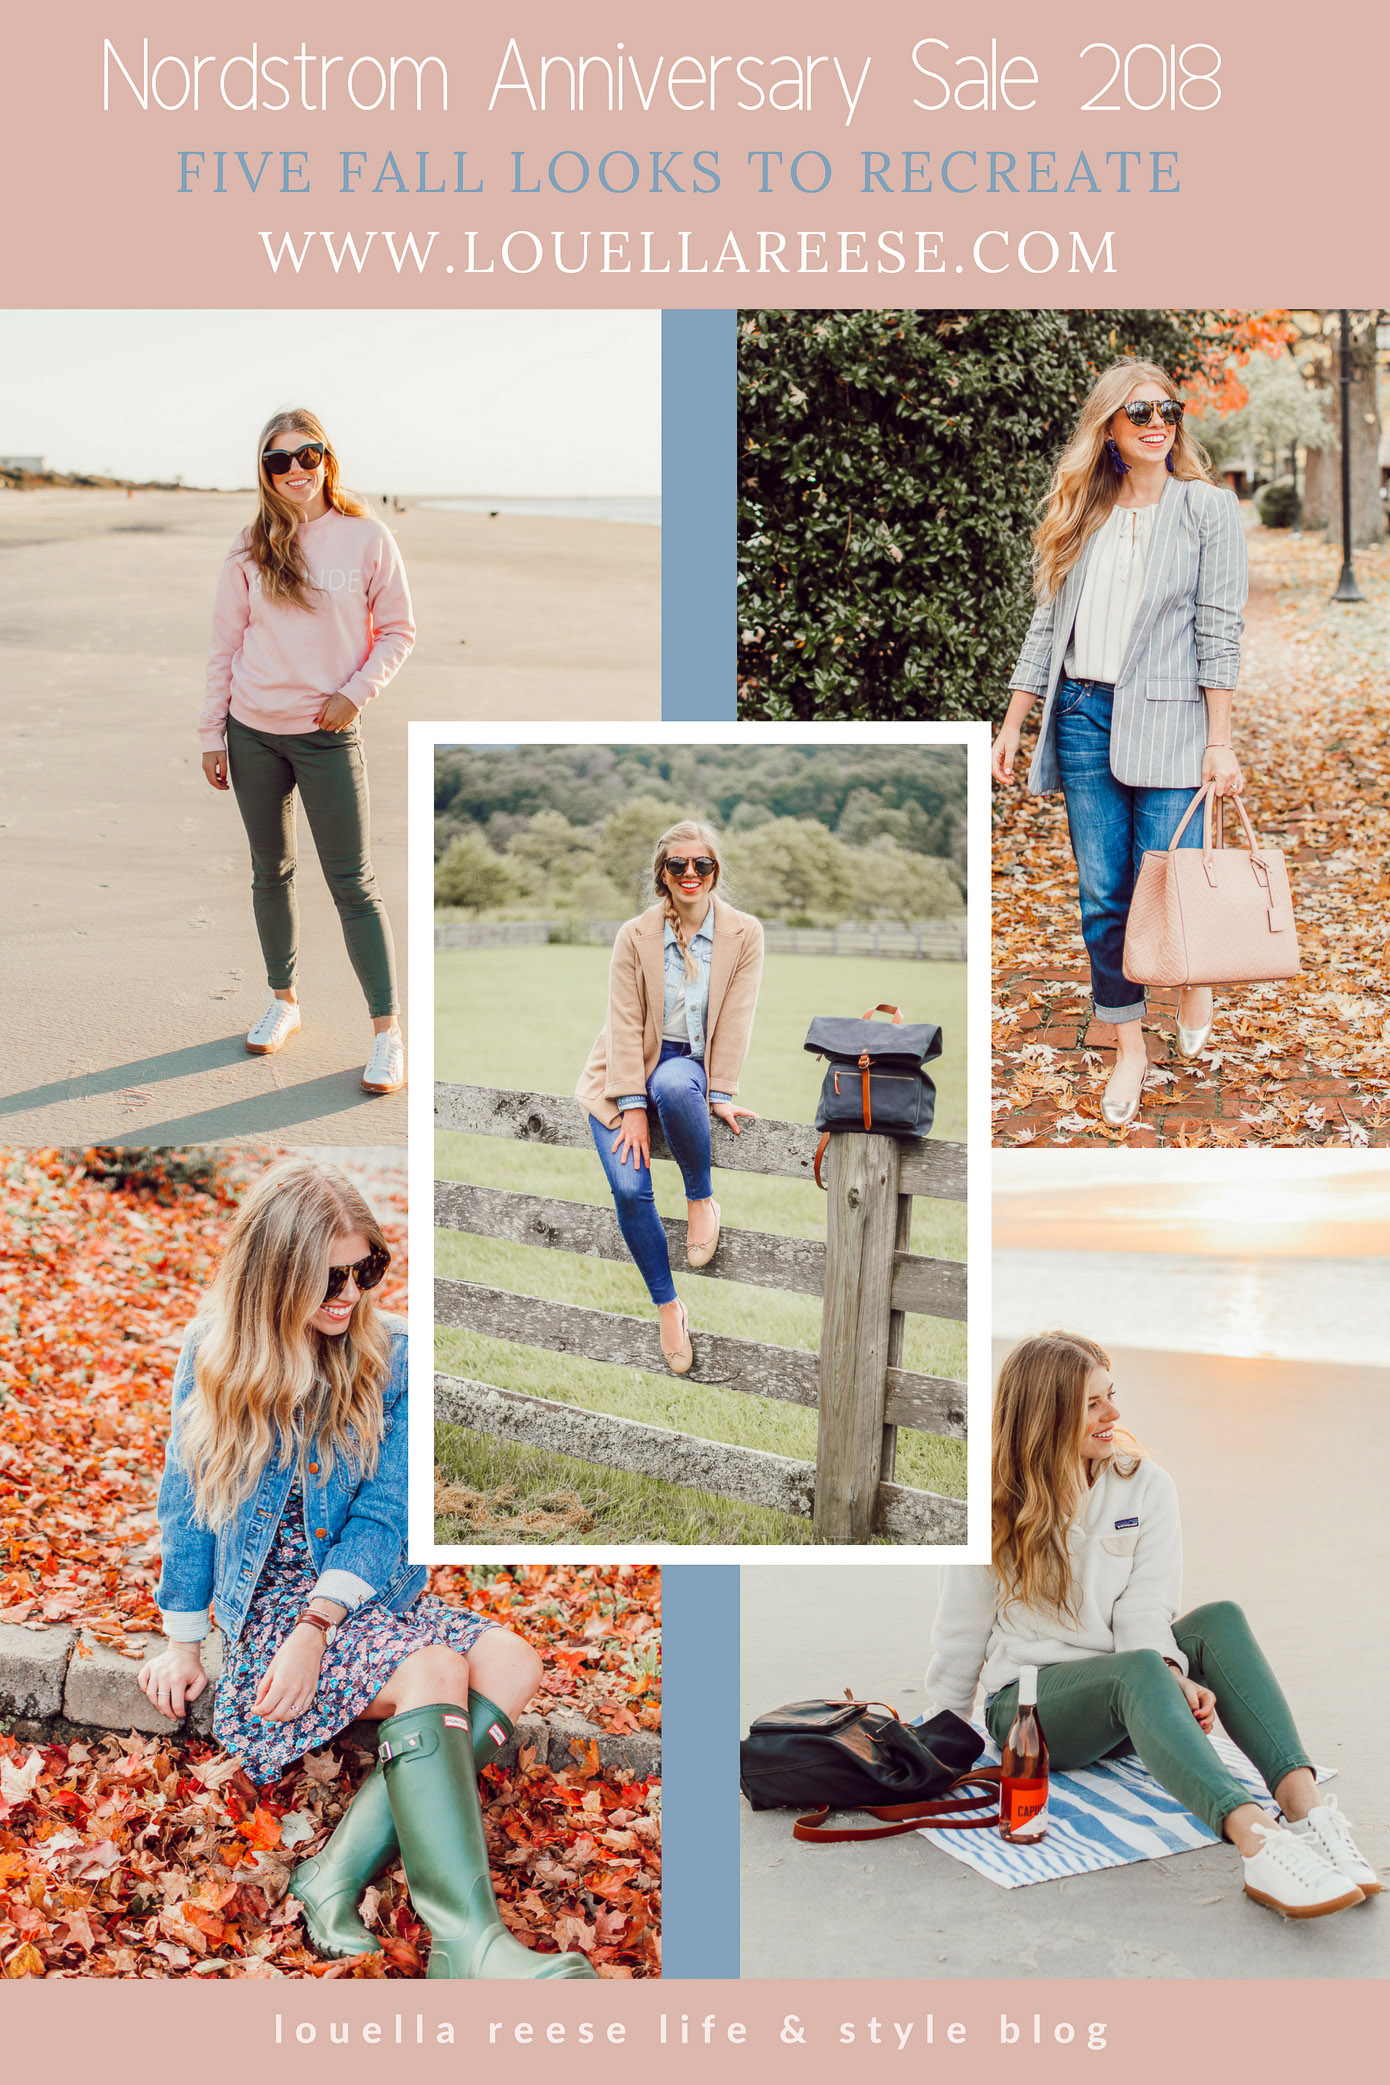 5 Fall Looks to Recreate from the Nordstrom Anniversary Sale | Casual Fall Style featured on Louella Reese